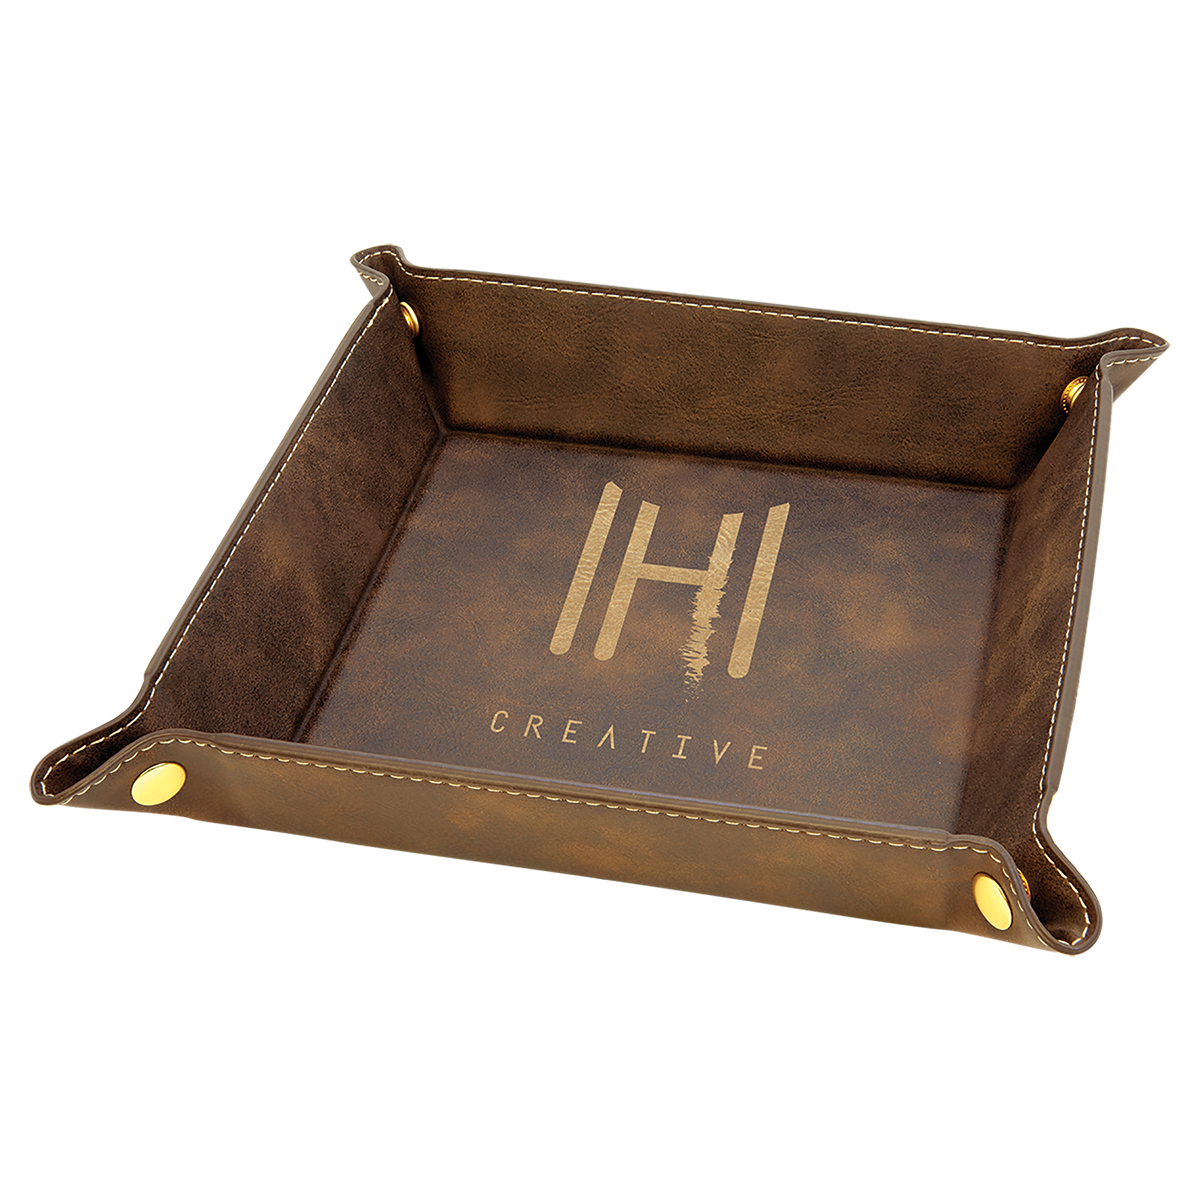 Leatherette Snap Up Trays